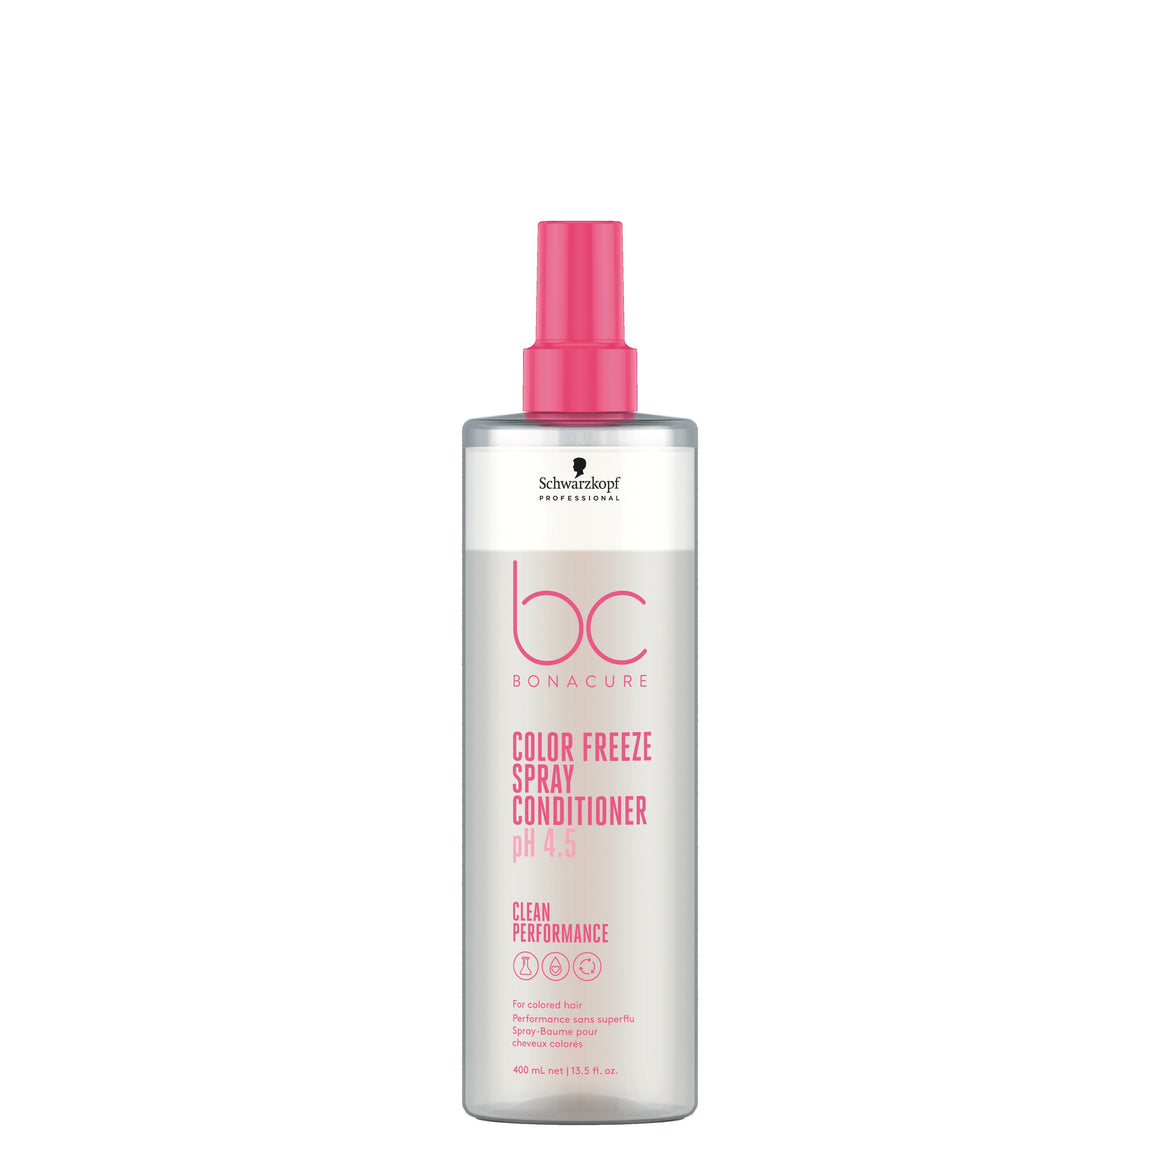 Schwarzkopf Professional BC Color Freeze Spray Conditioner 200ml at Eds Hair Bramhall